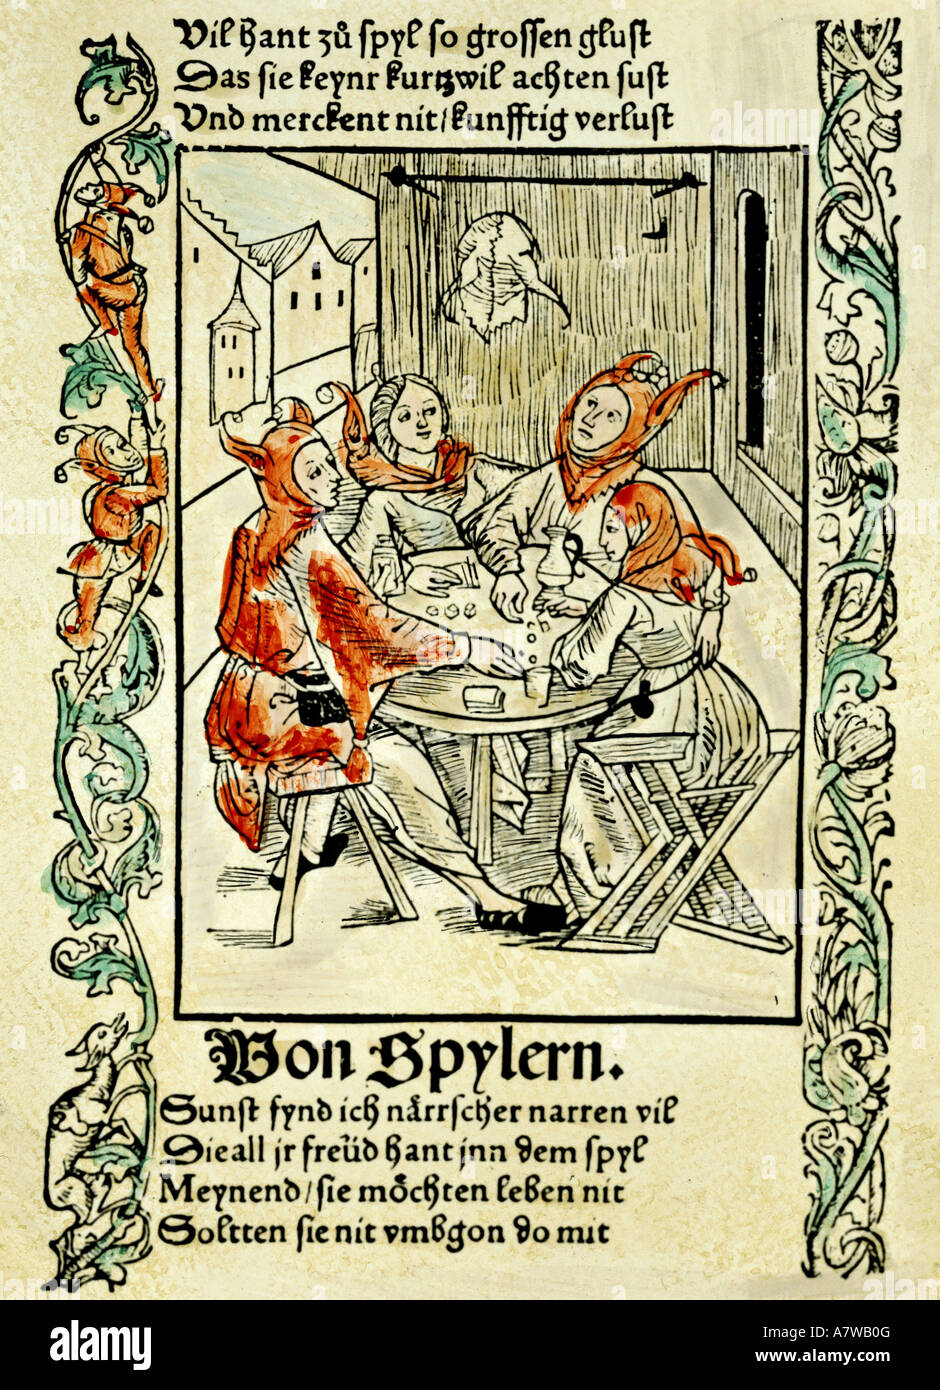 Brant, Sebastian, 1457/1458 - 10.5.1521, German humanist and author/writer, works, 'Ship of Fools', figure nrumber 73, 'of gamblers', coloured woodcut by the Haintz-Nar-Meister, printed by Johann Bergmann von Olpe, Basel, 1494, private collection, , Stock Photo